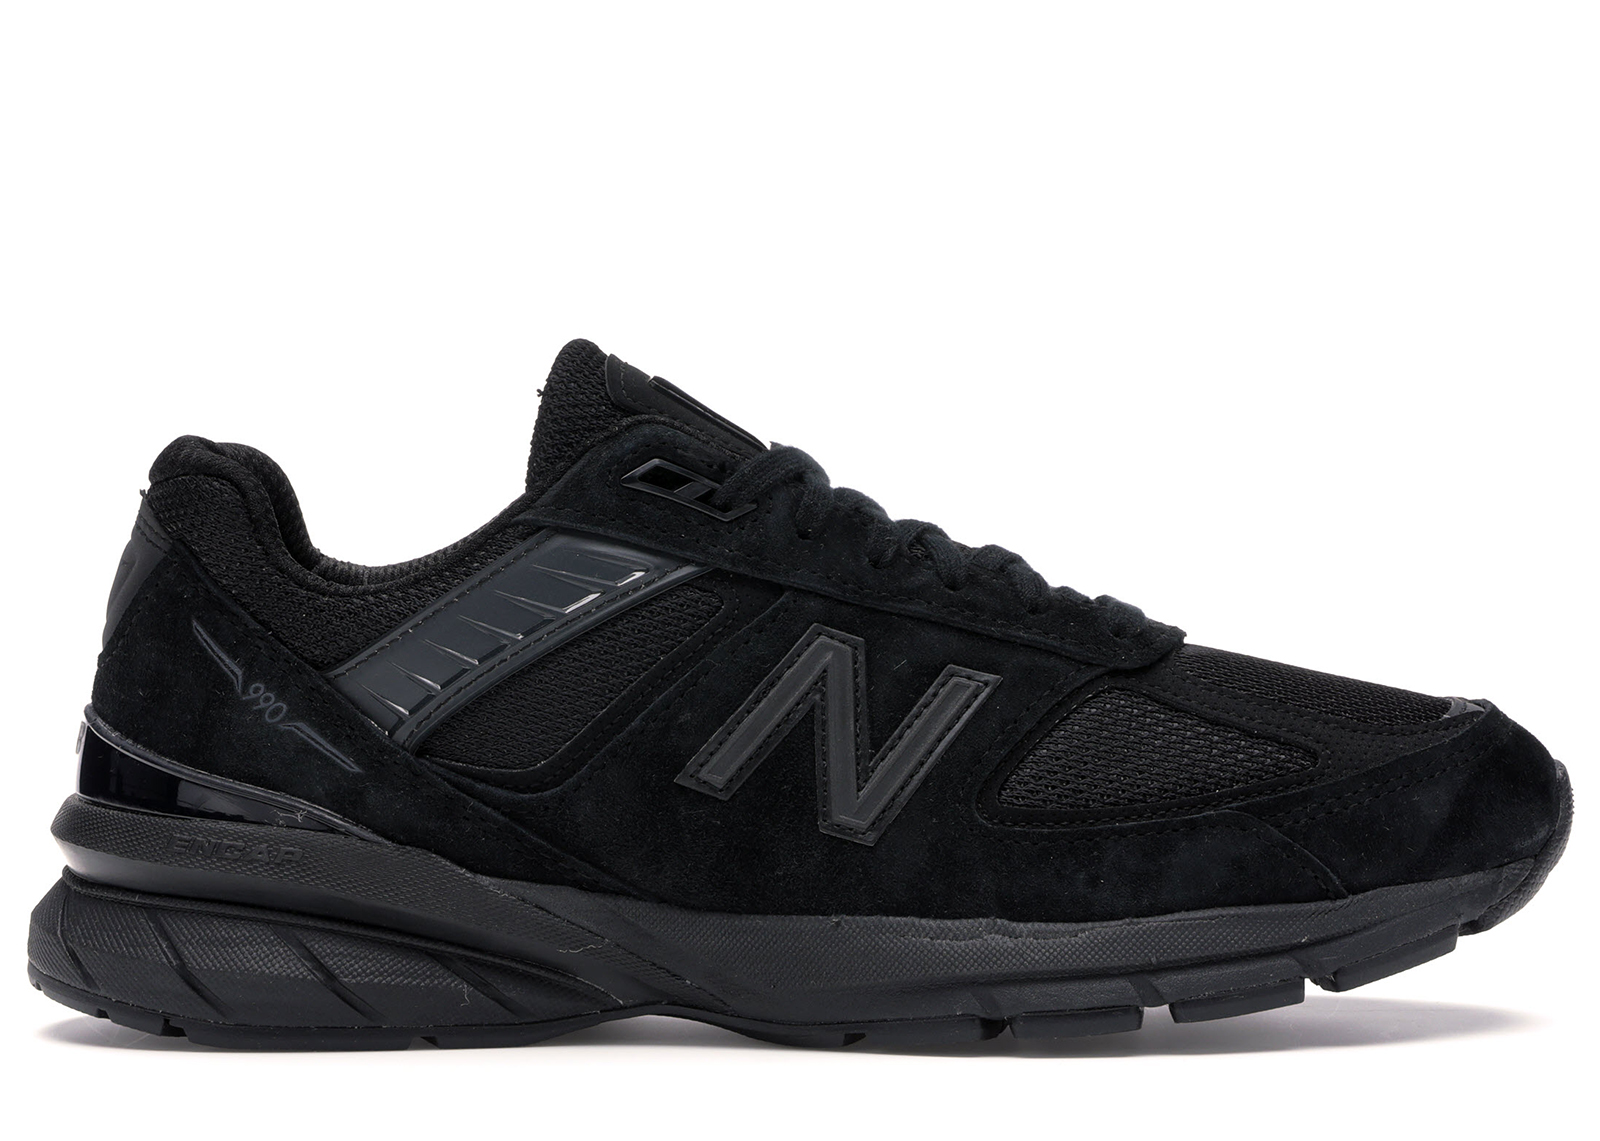 Buy New Balance 990v5 Shoes & New Sneakers - StockX